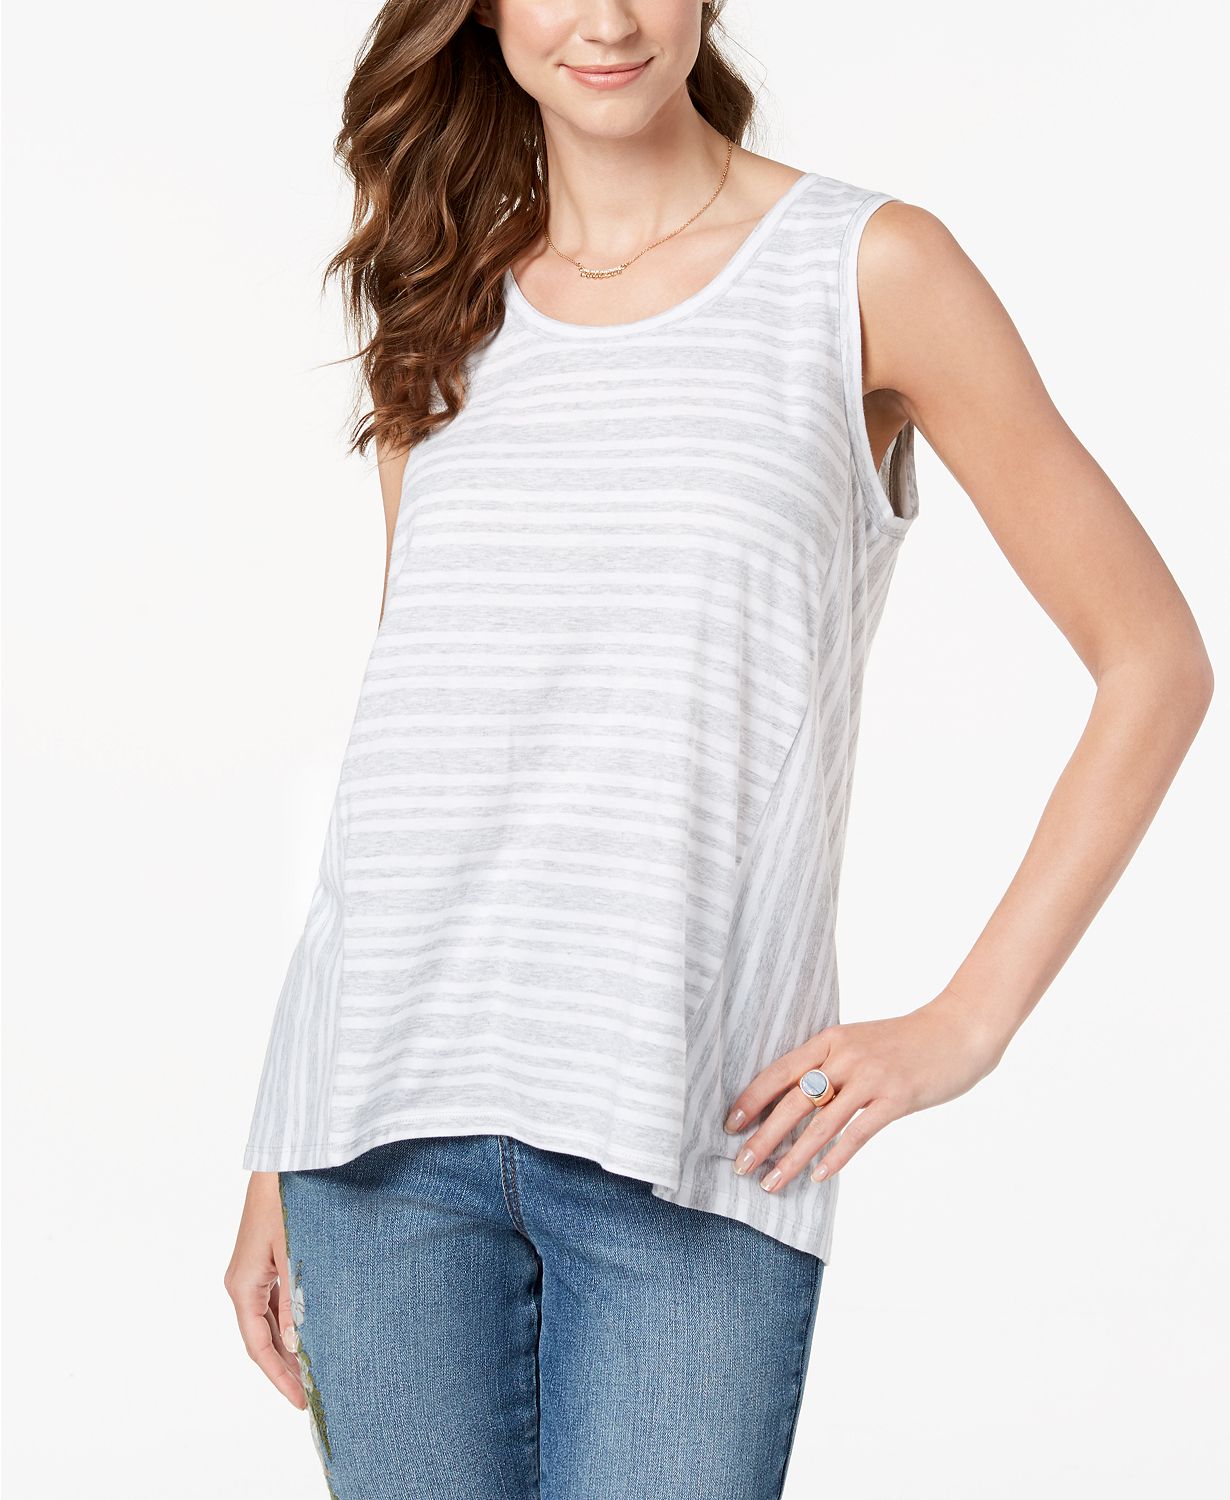 Style Co High-Low Top Light Grey Heather XXL